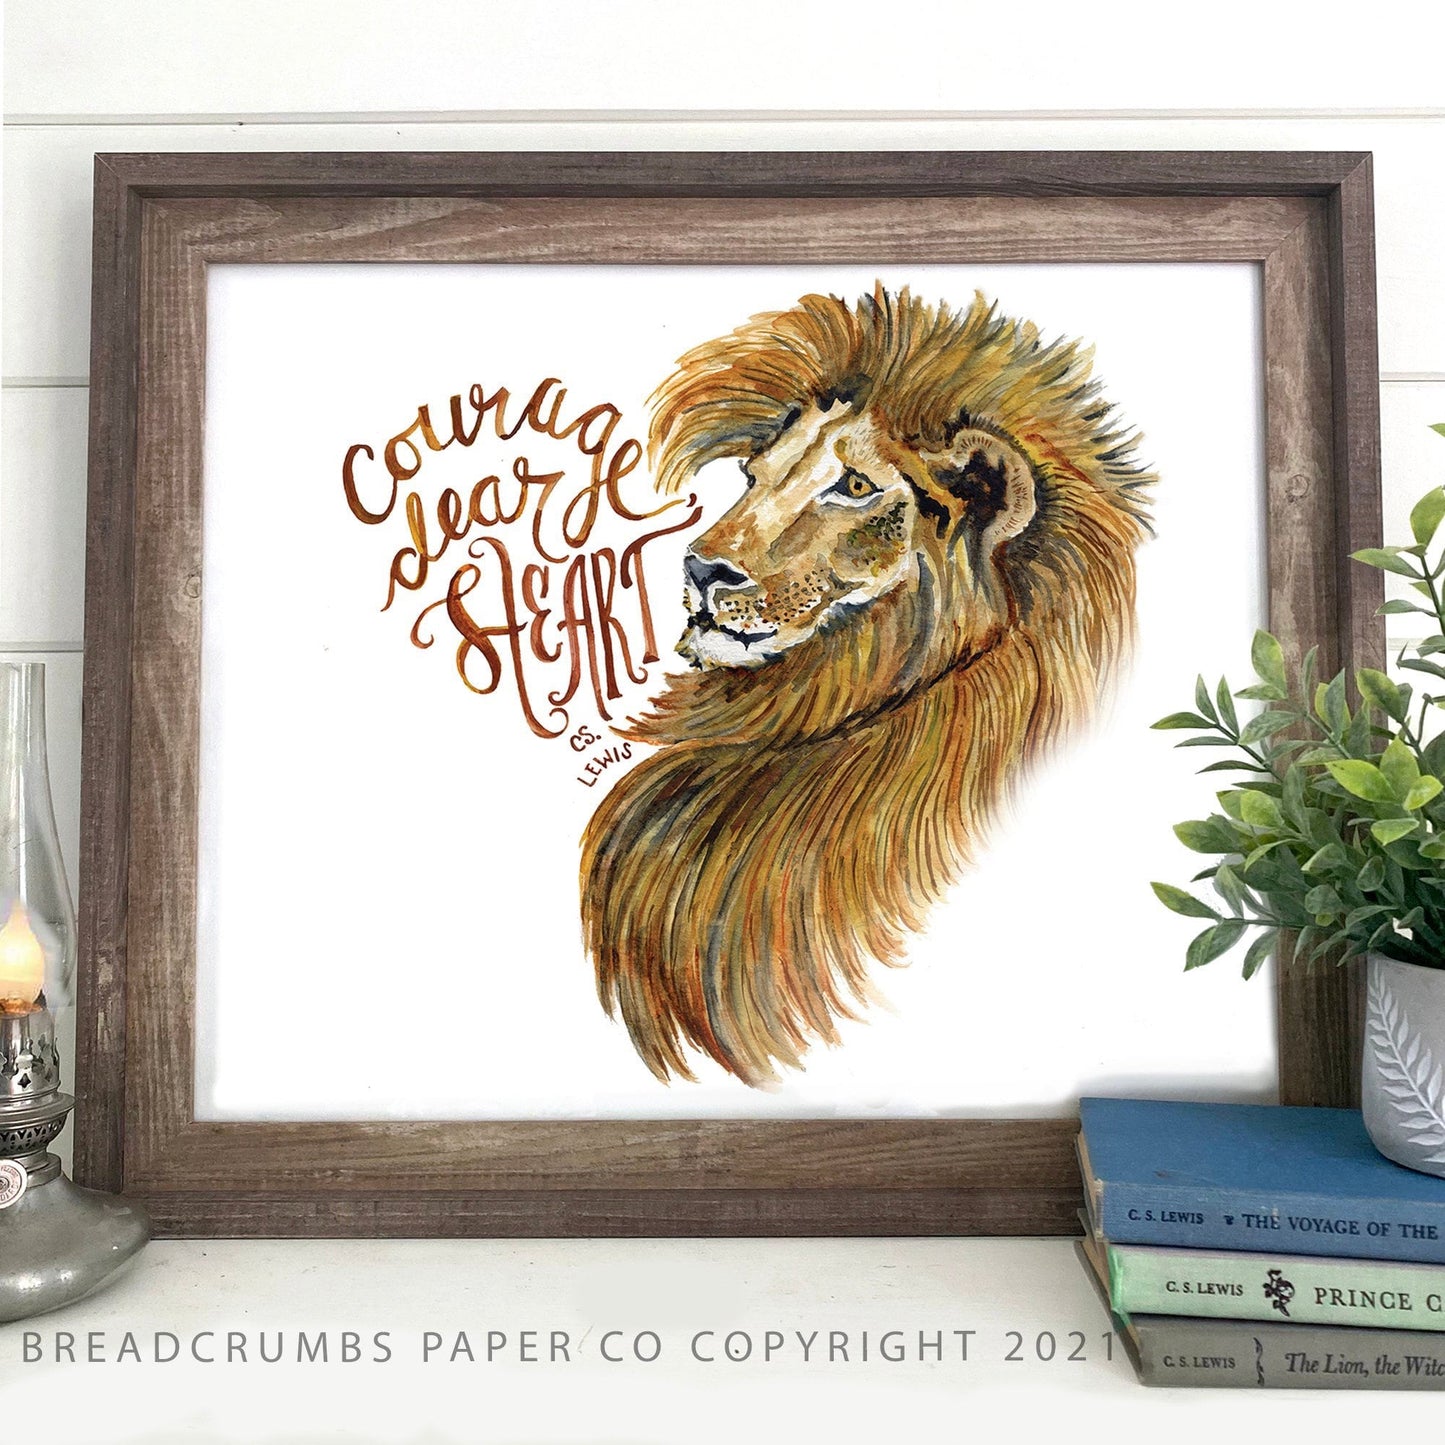 "Courage, Dear Heart" Aslan Quote Print-Posters, Prints, & Visual Artwork-Breadcrumbs Paper Co